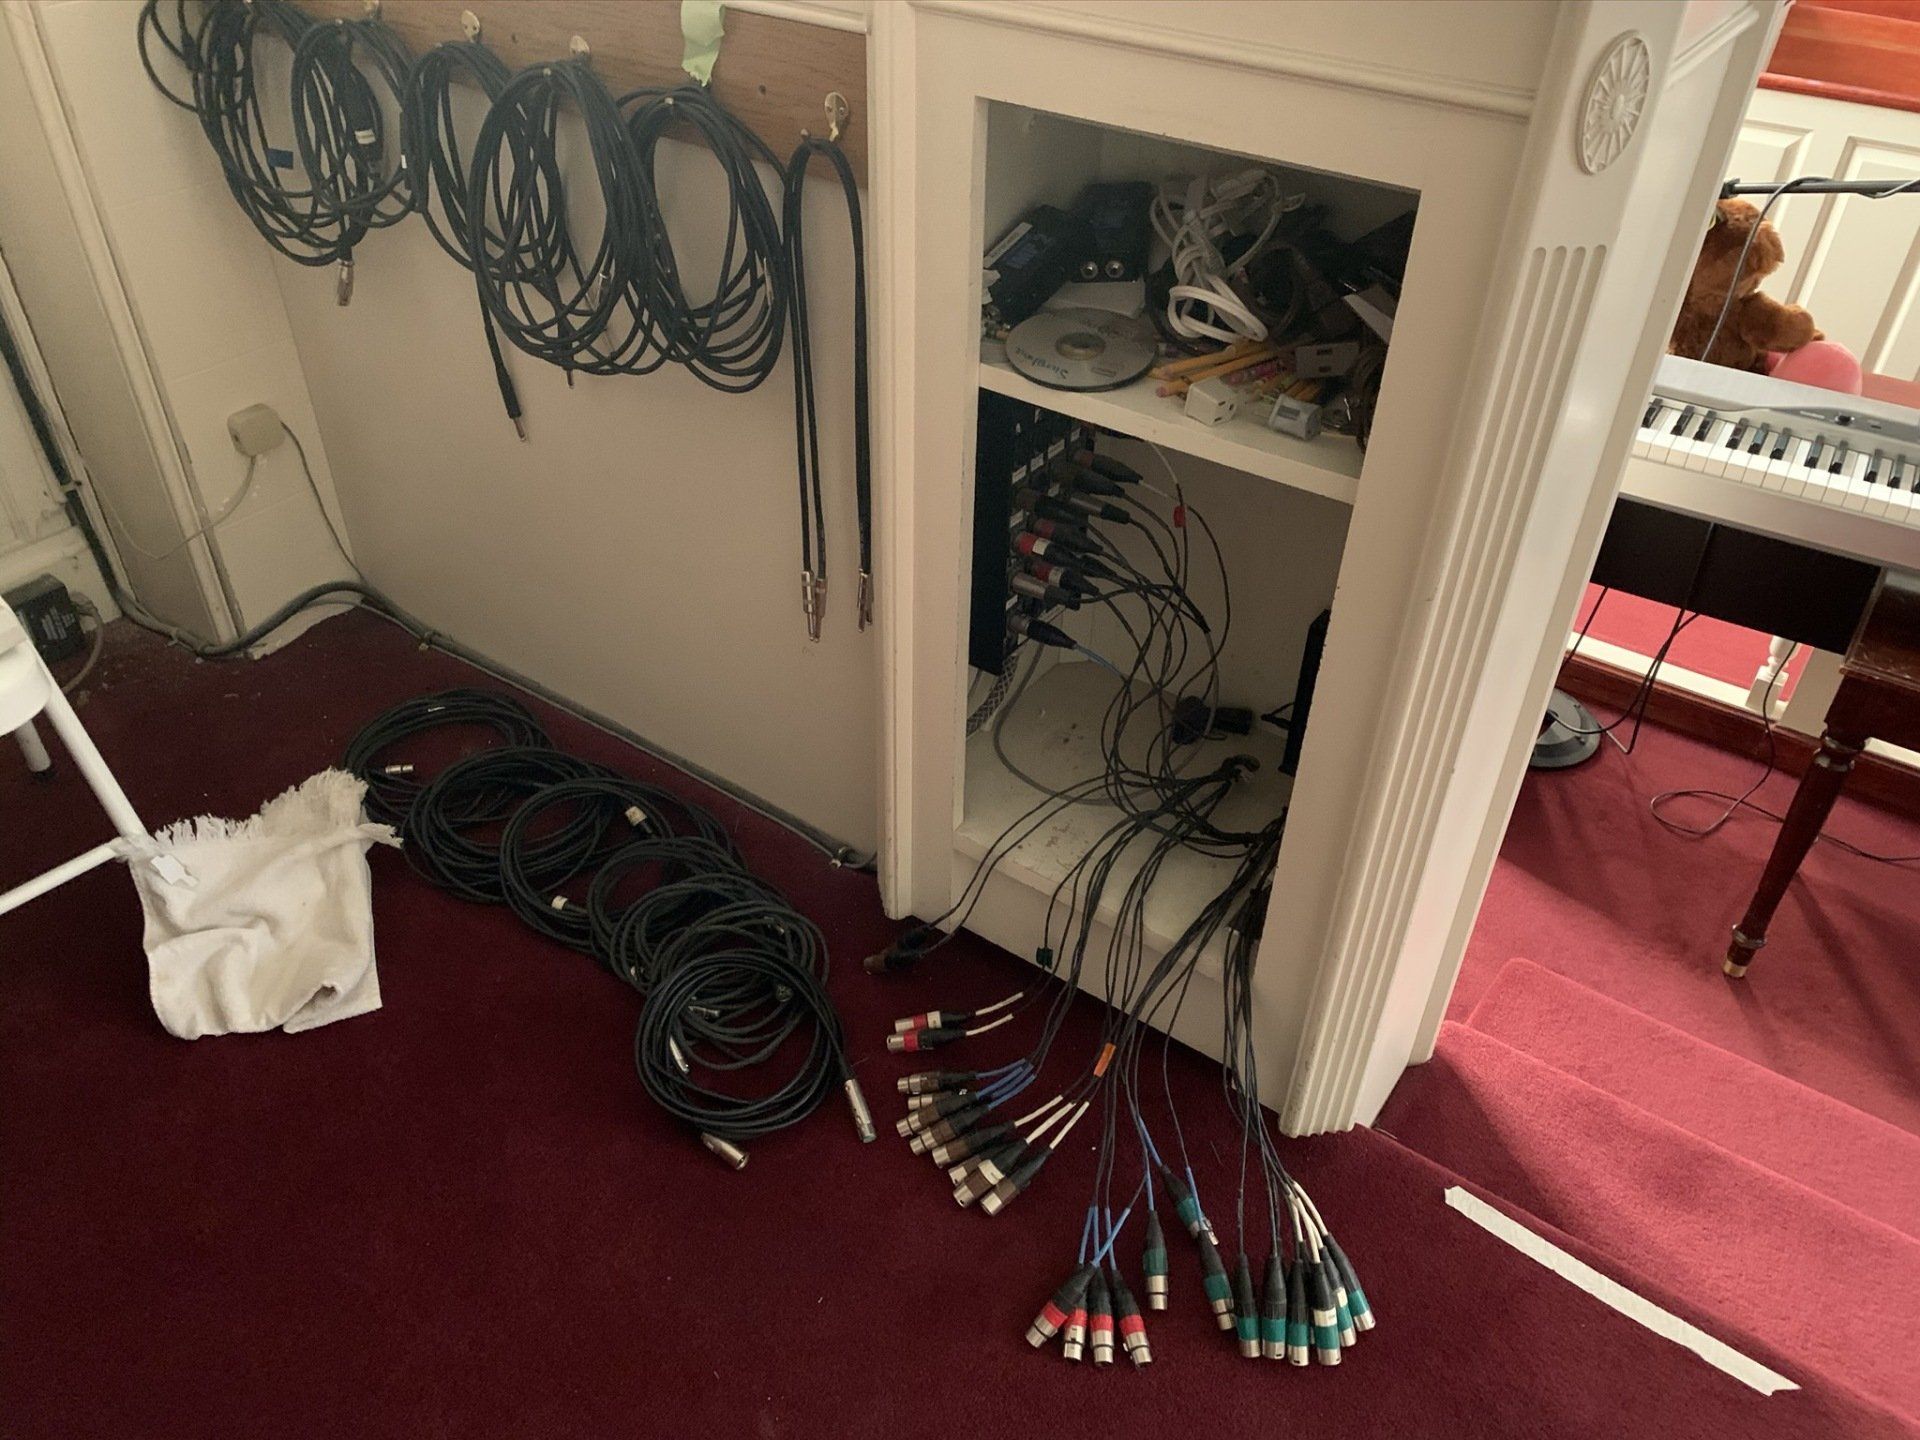 A bunch of wires are laying on the floor in a room